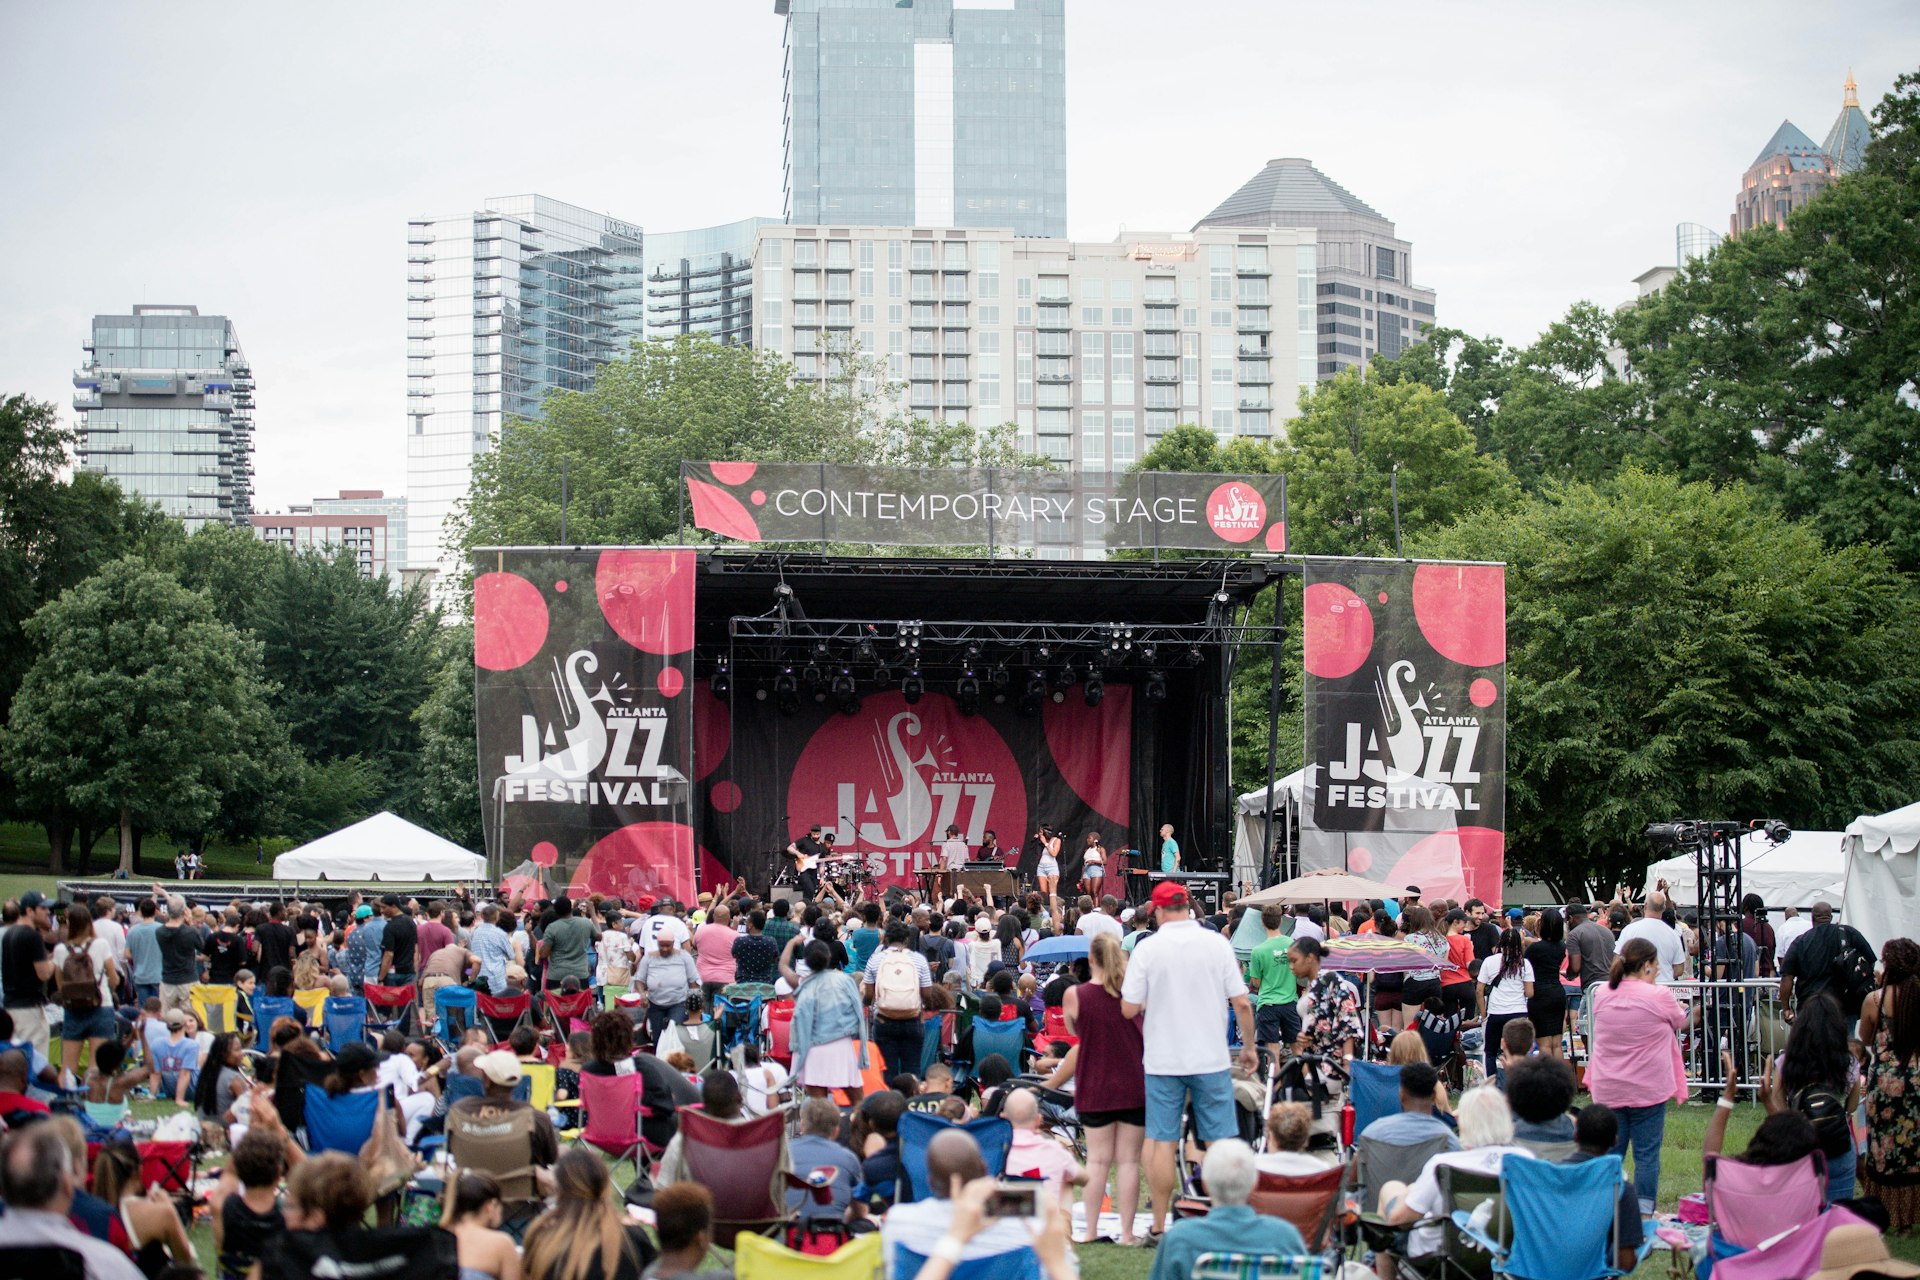 A large group of people sit or stand on the grassy lawn facing the stage during the Atlanta Jazz Festival. This picture was taken in 2018.